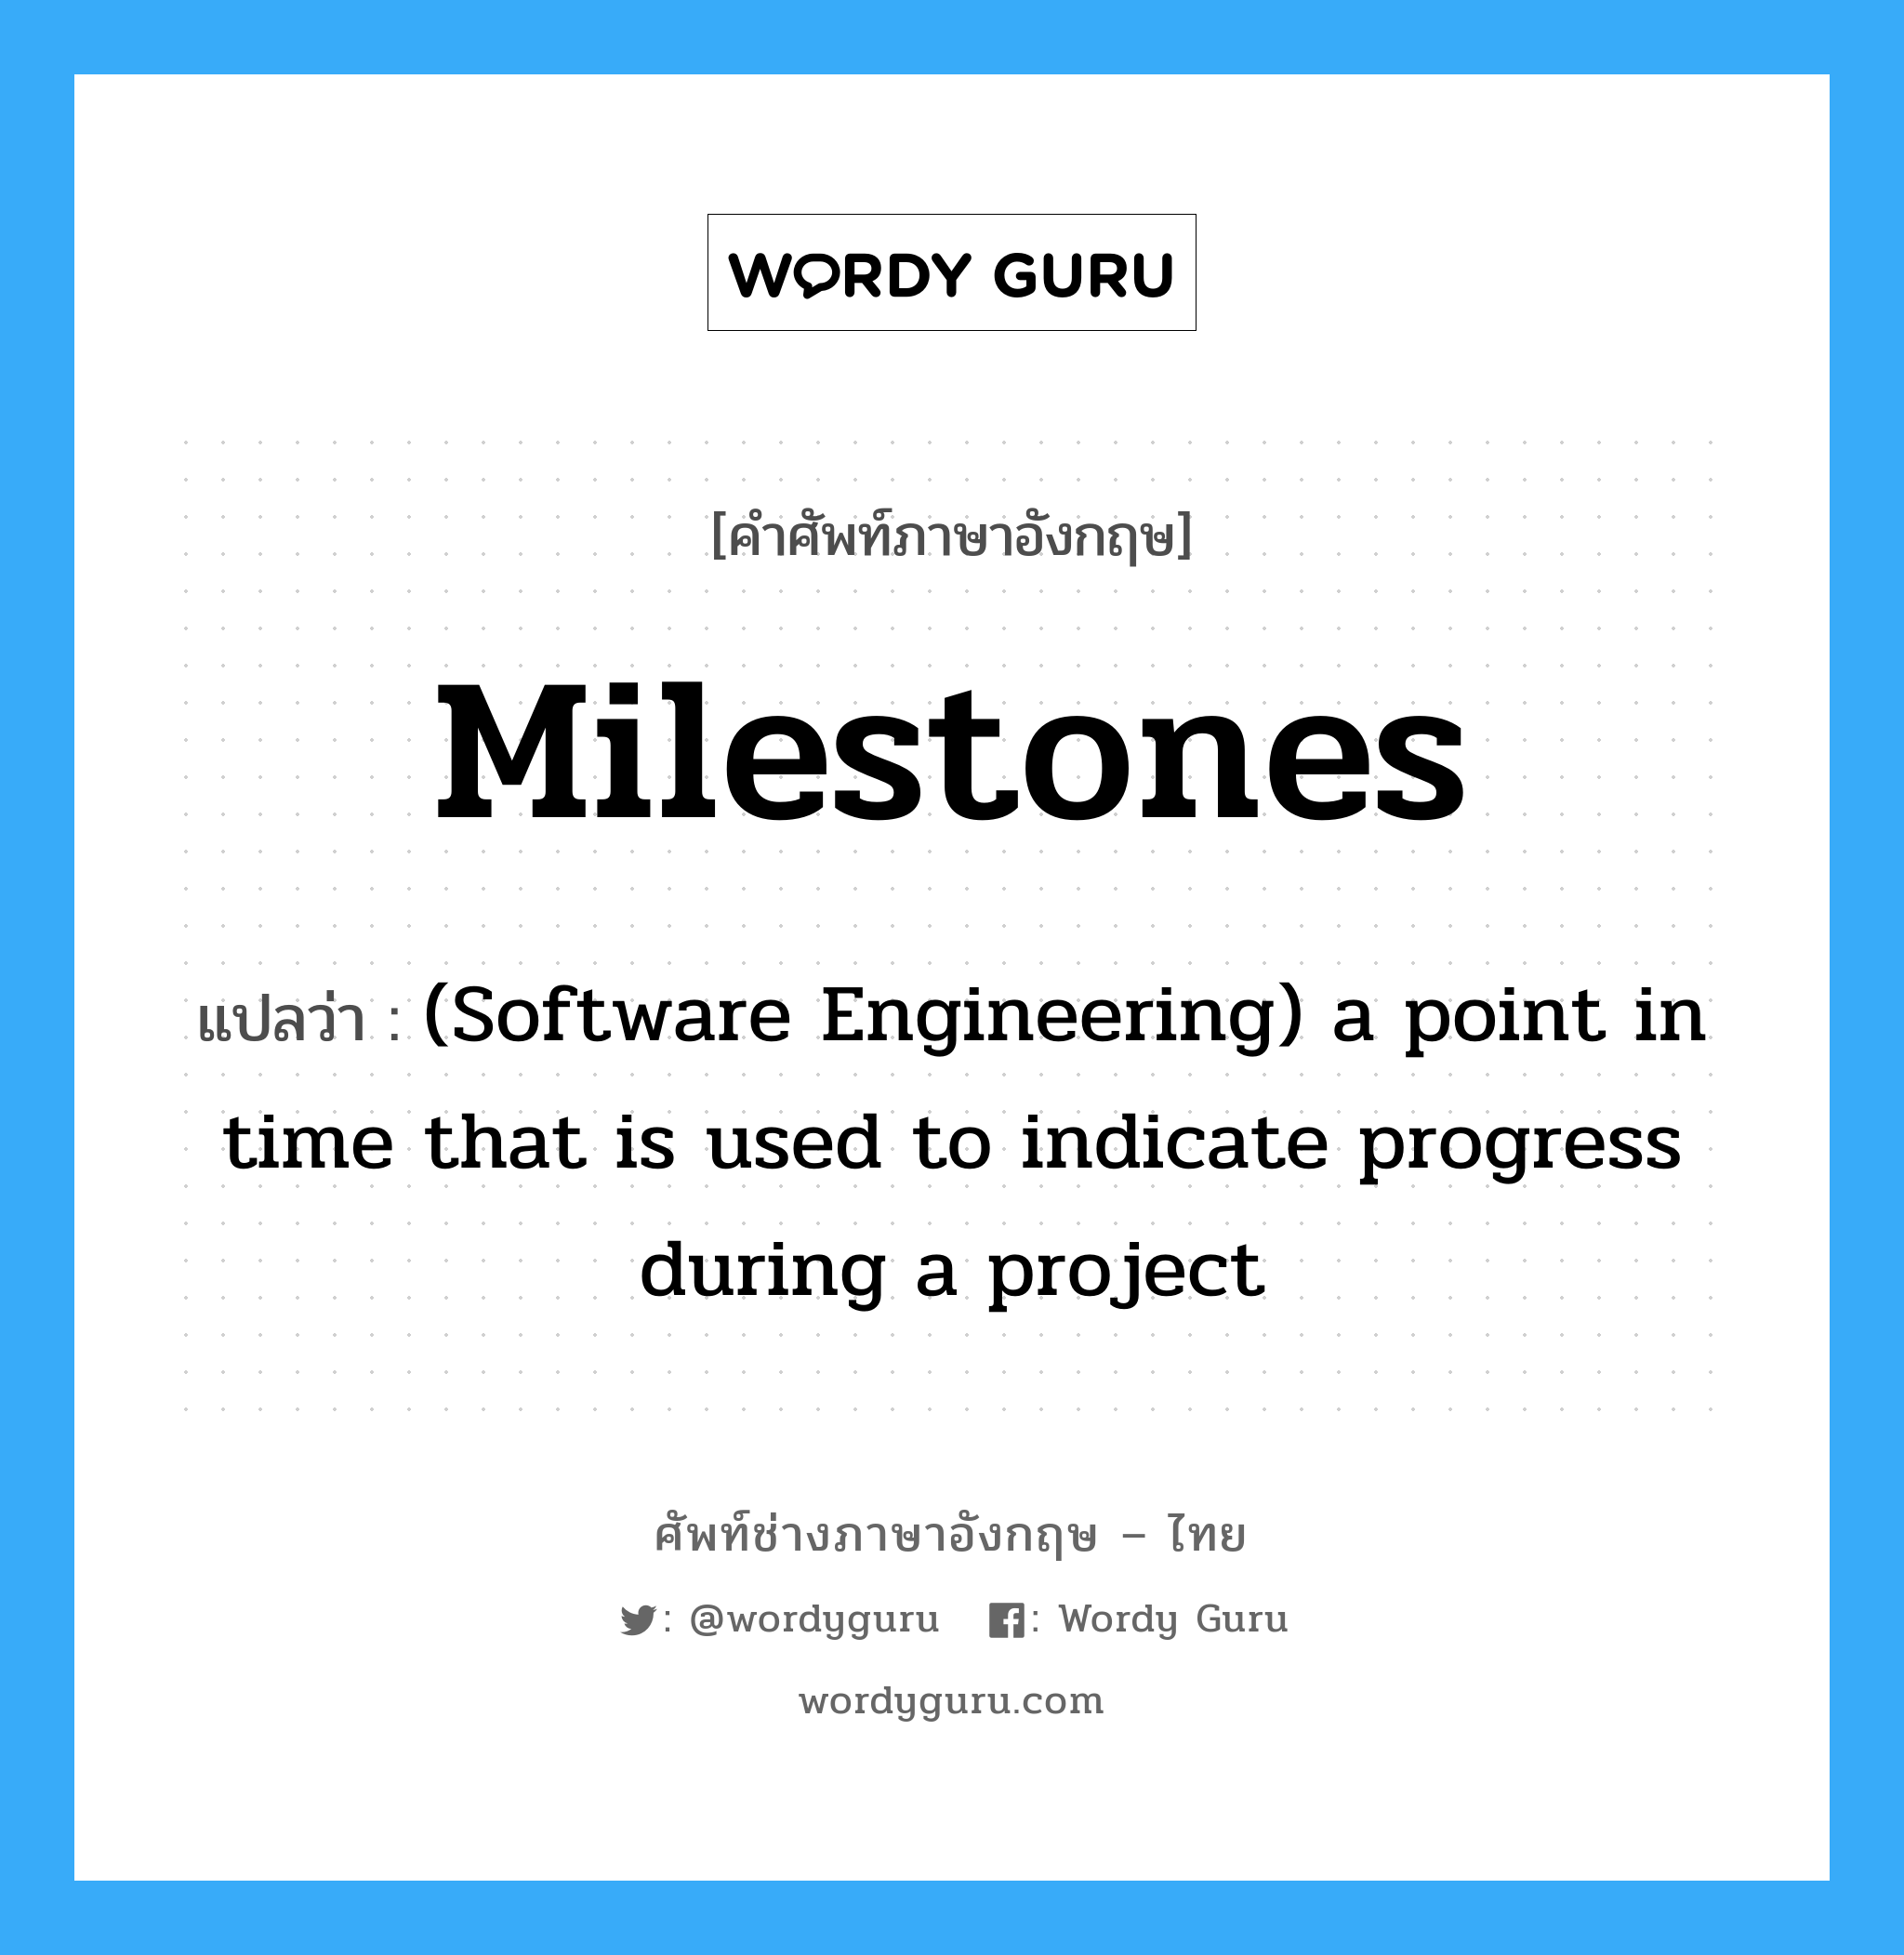 Milestones แปลว่า?, คำศัพท์ช่างภาษาอังกฤษ - ไทย Milestones คำศัพท์ภาษาอังกฤษ Milestones แปลว่า (Software Engineering) a point in time that is used to indicate progress during a project